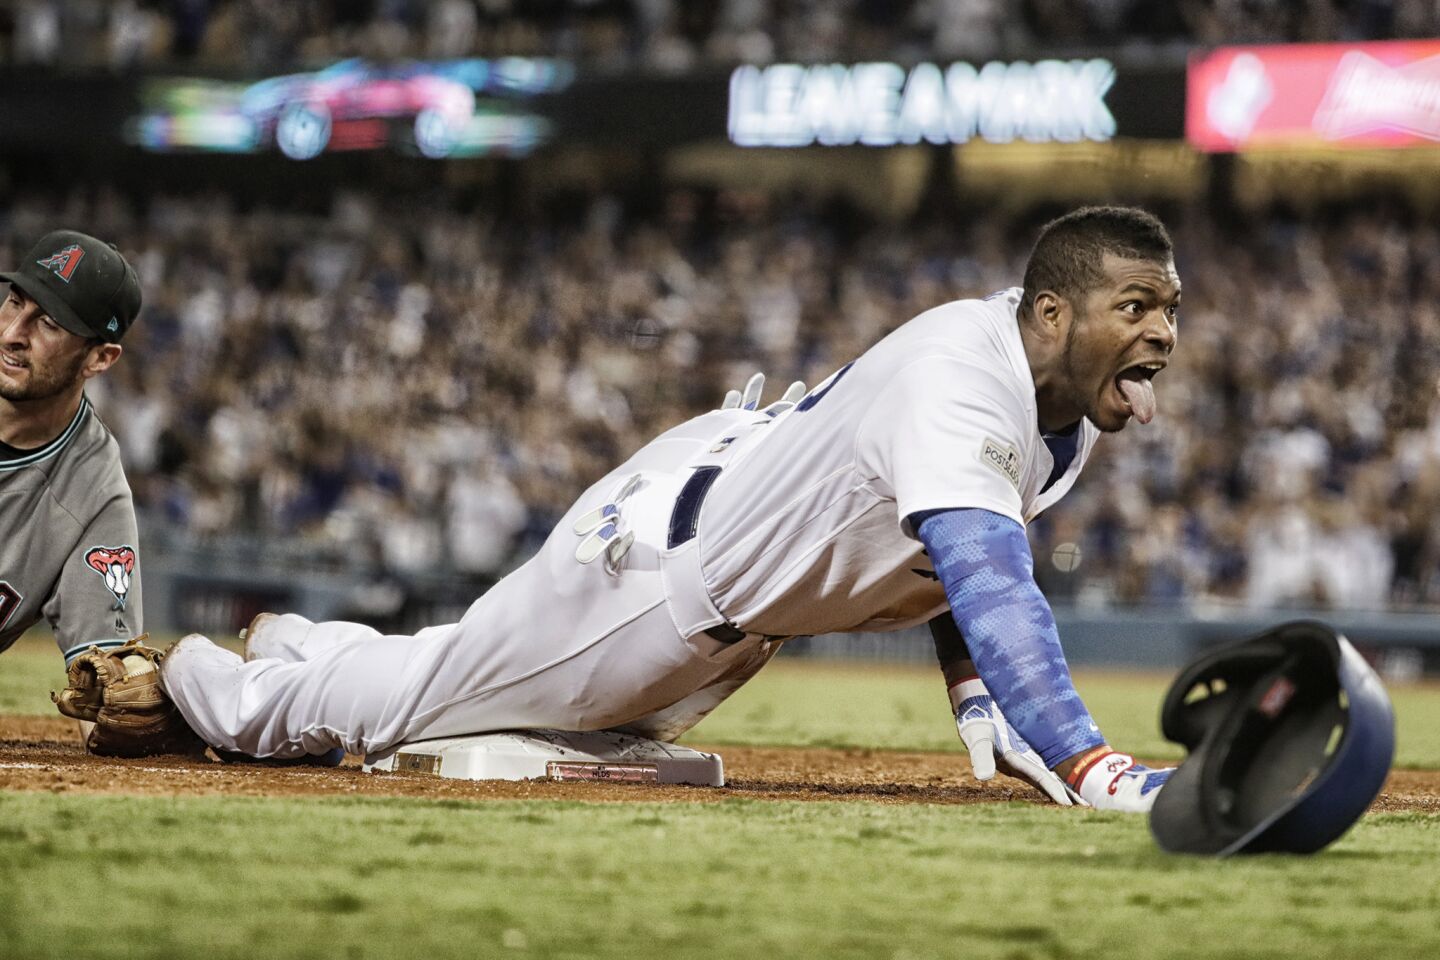 Dodgers right fielder Yasiel Puig gets wild after sliding into third base past the tage of Diamondbacks third baseman Adam Rosales for a seventh inning triple in Game 1 of the NLDS at Dodger Stadium.